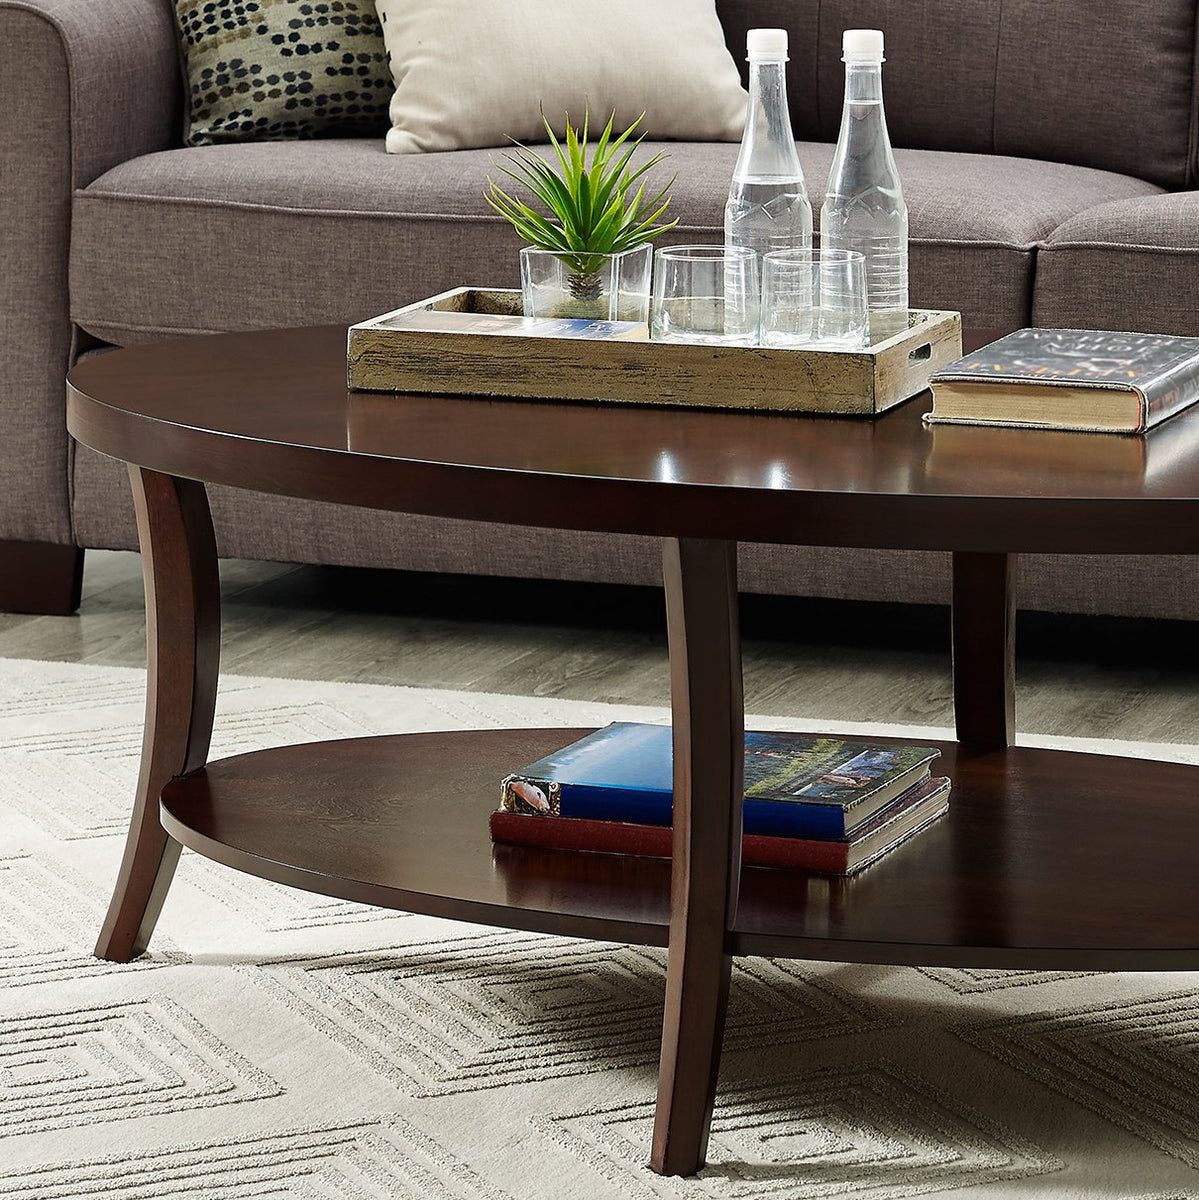 Perth Espresso Oval Coffee Table With Shelf – Roundhill Furniture Inside Espresso Wood Finish Coffee Tables (Gallery 15 of 21)